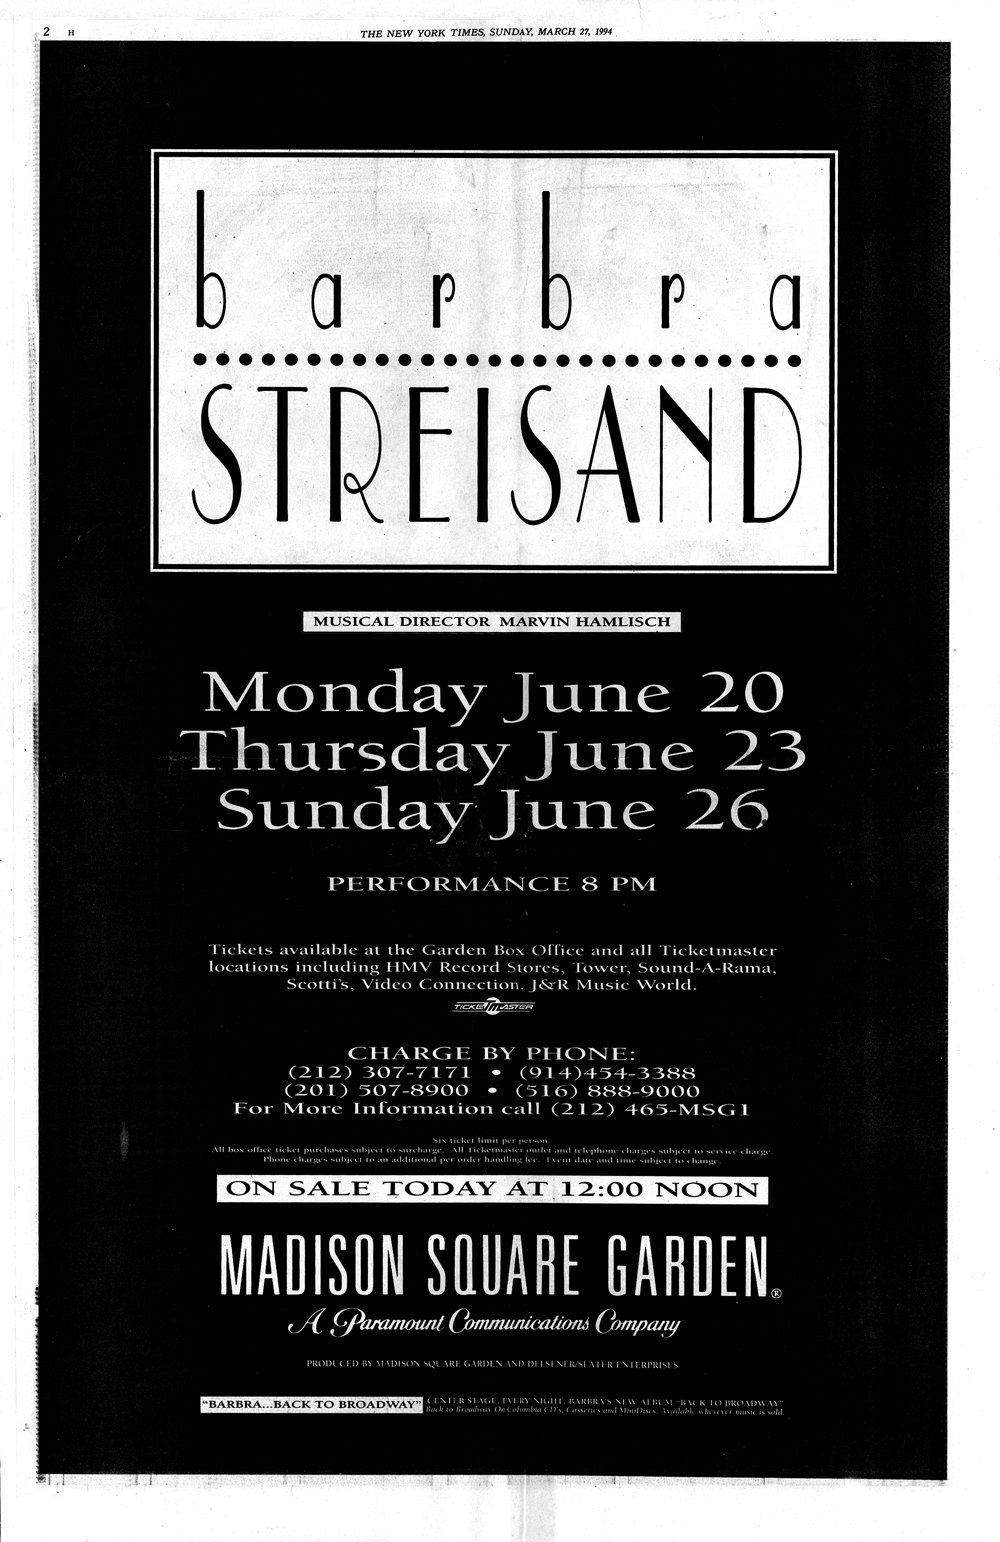 NY Times ad for Streisand's June 1994 concerts.